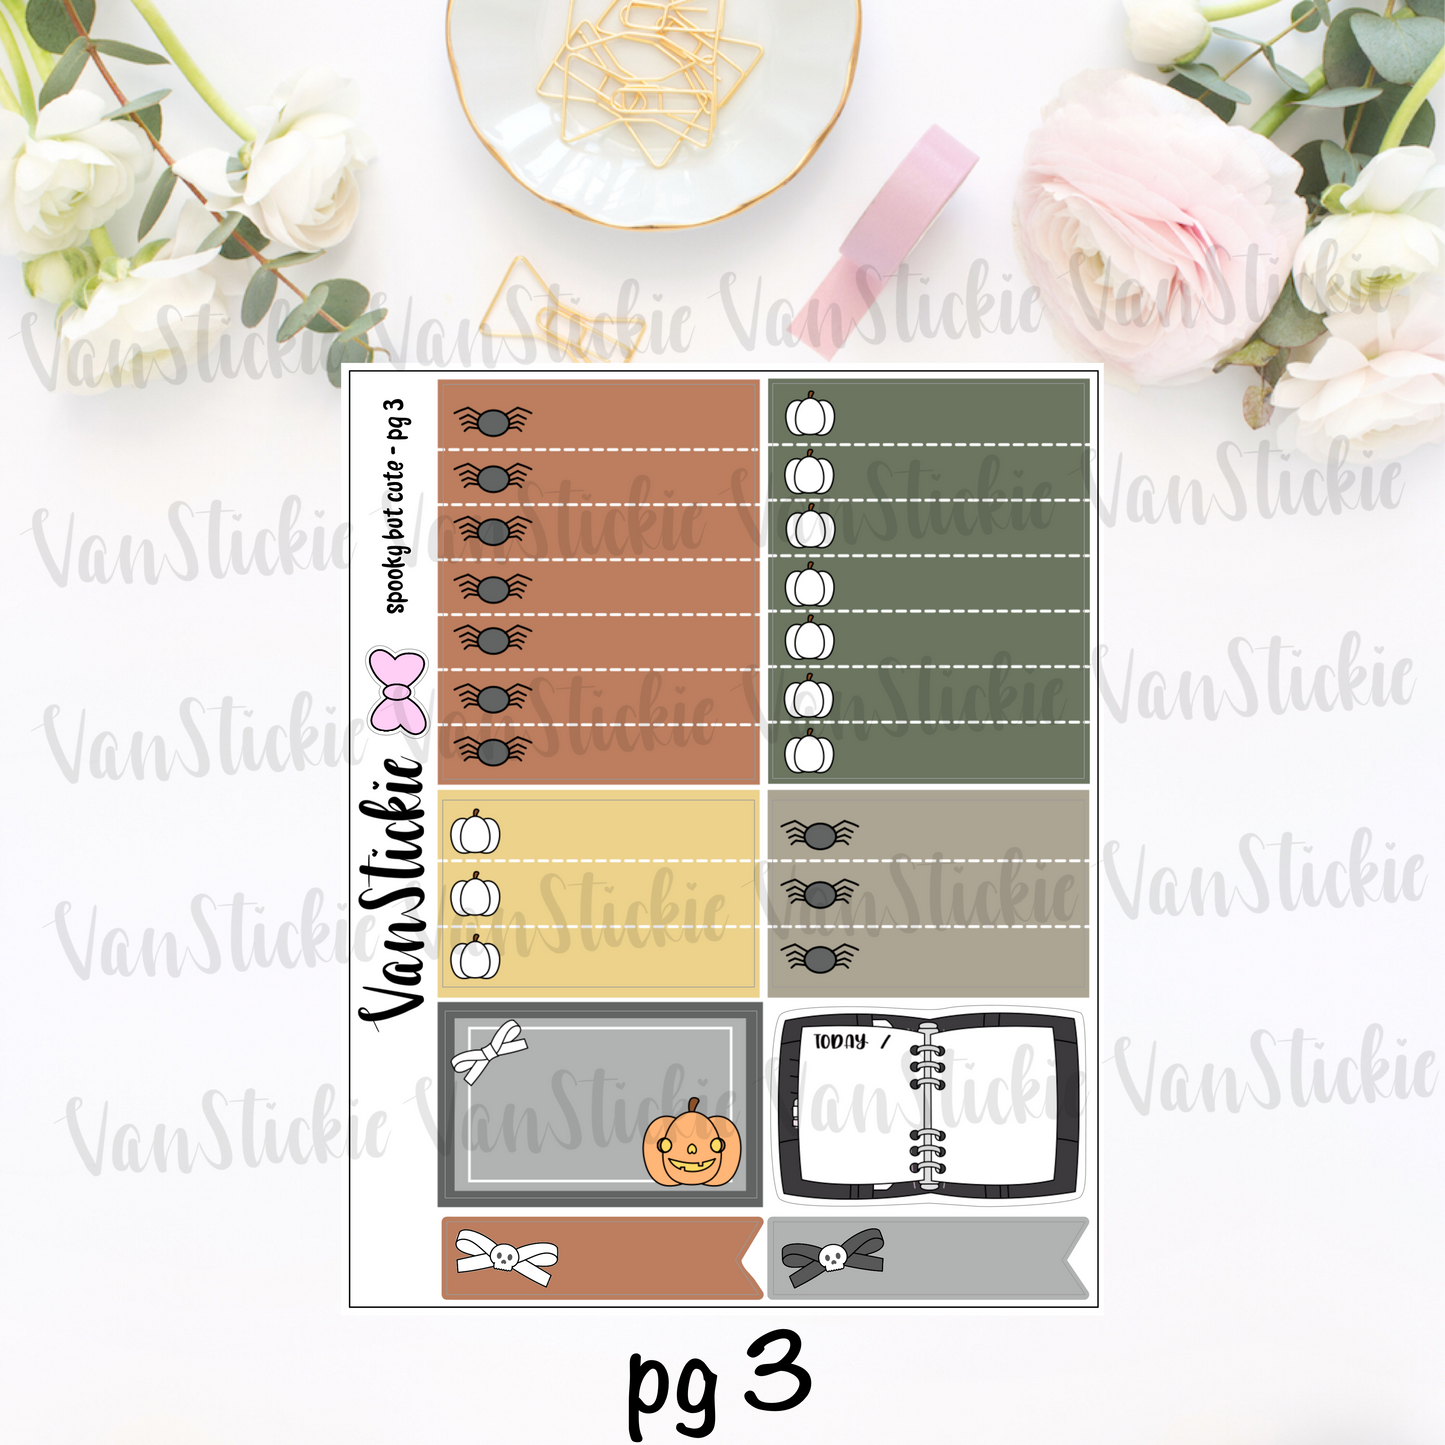 "Spooky But Cute" - sticker kit (11 pages of quarter sheets)